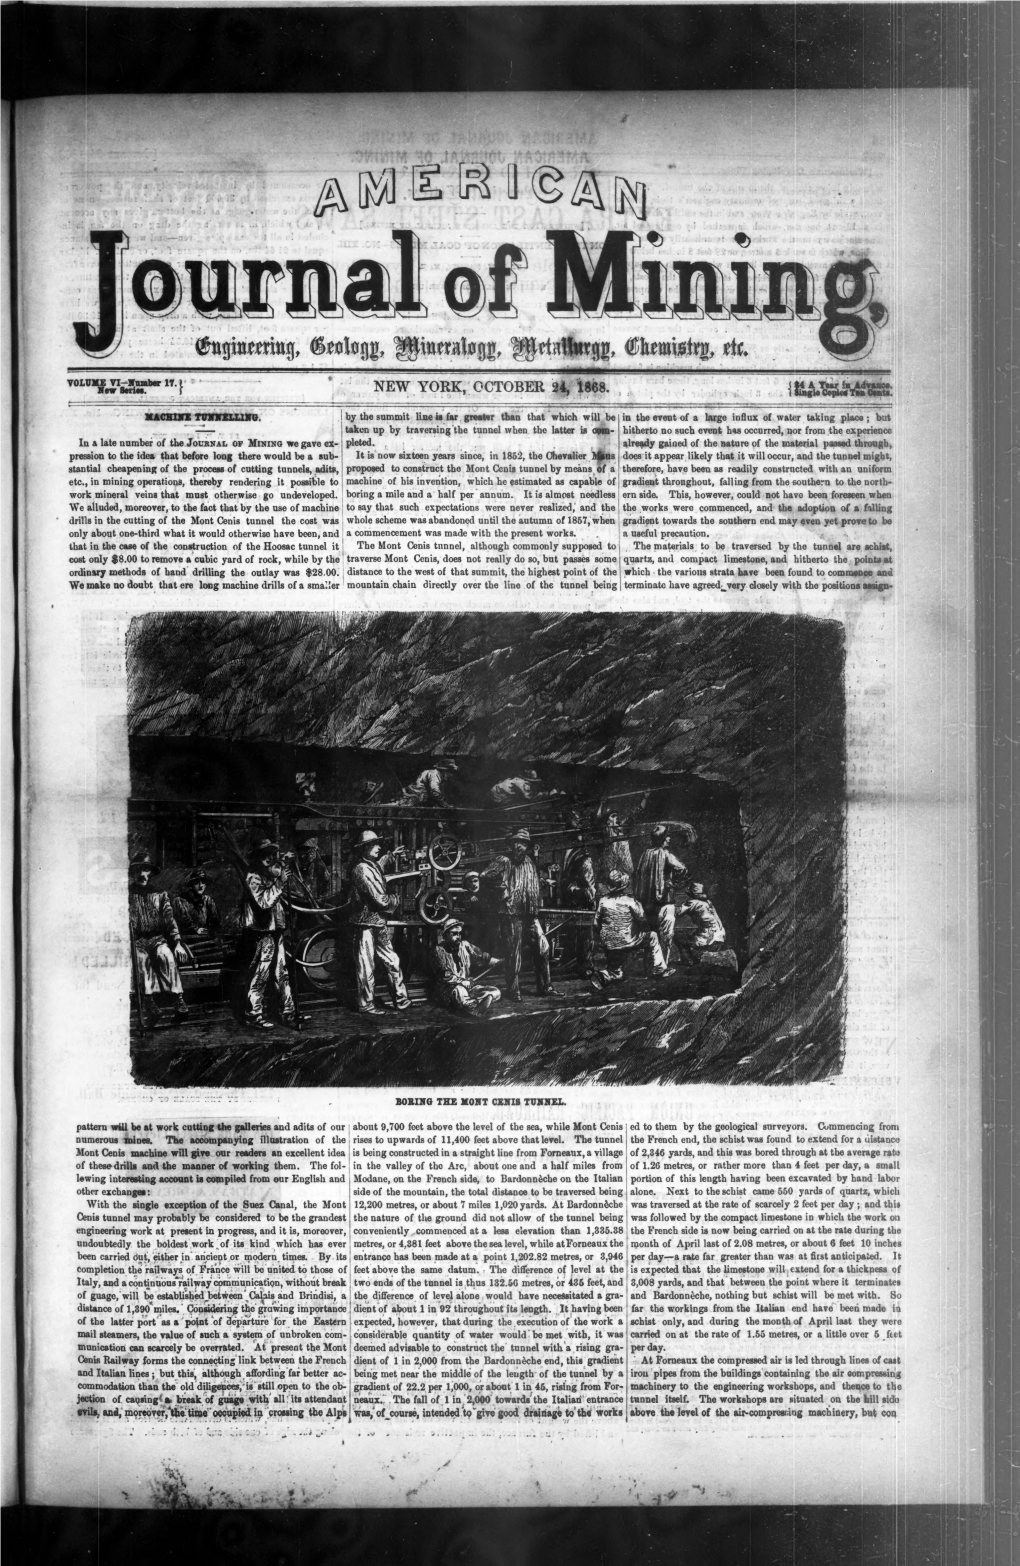 American Journal of Mining 1868-10-24: Vol 6 Iss 17